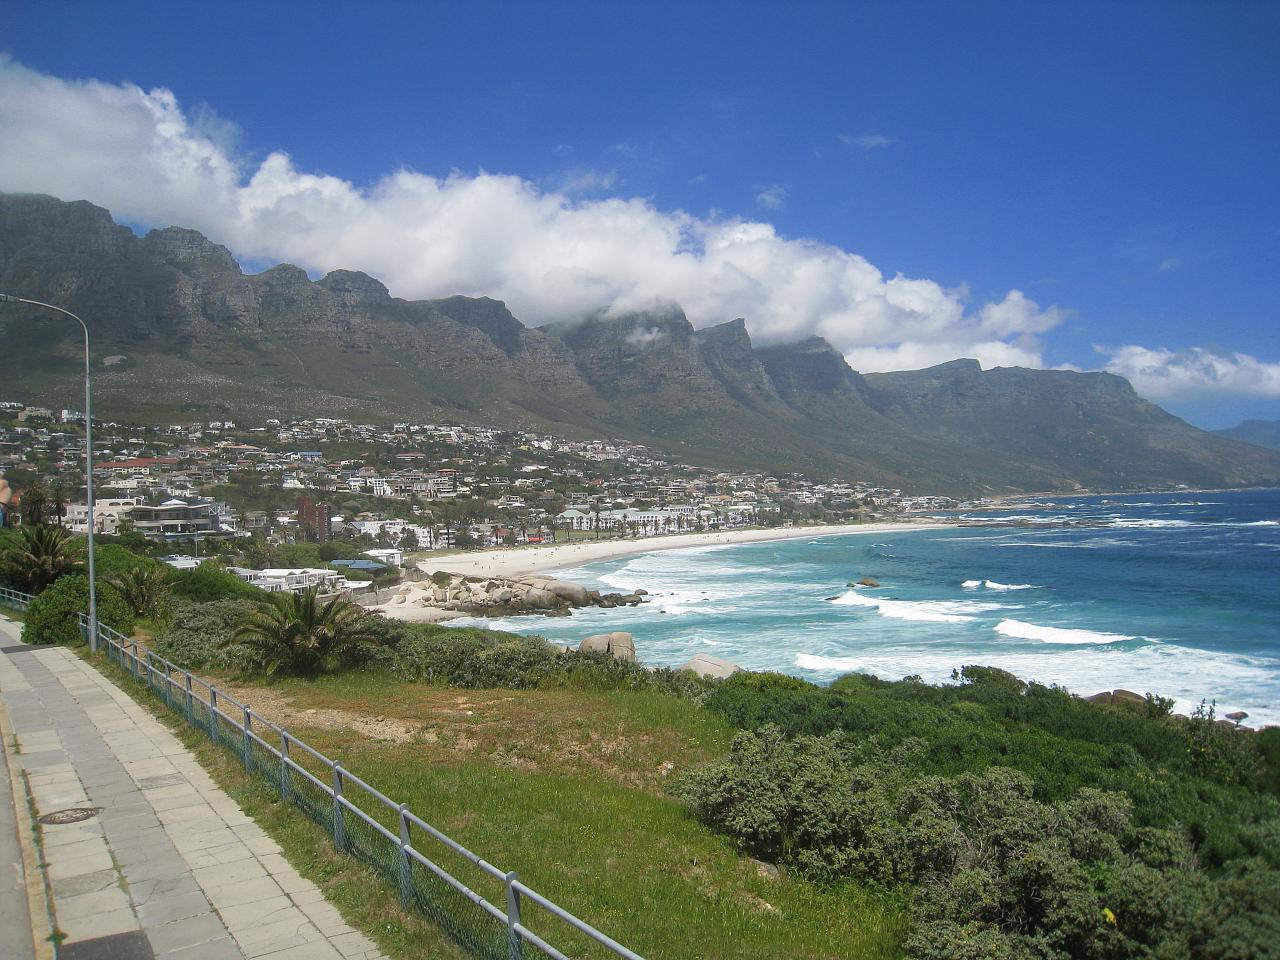 Camp's Bay and the 12 Apostles (mountains)